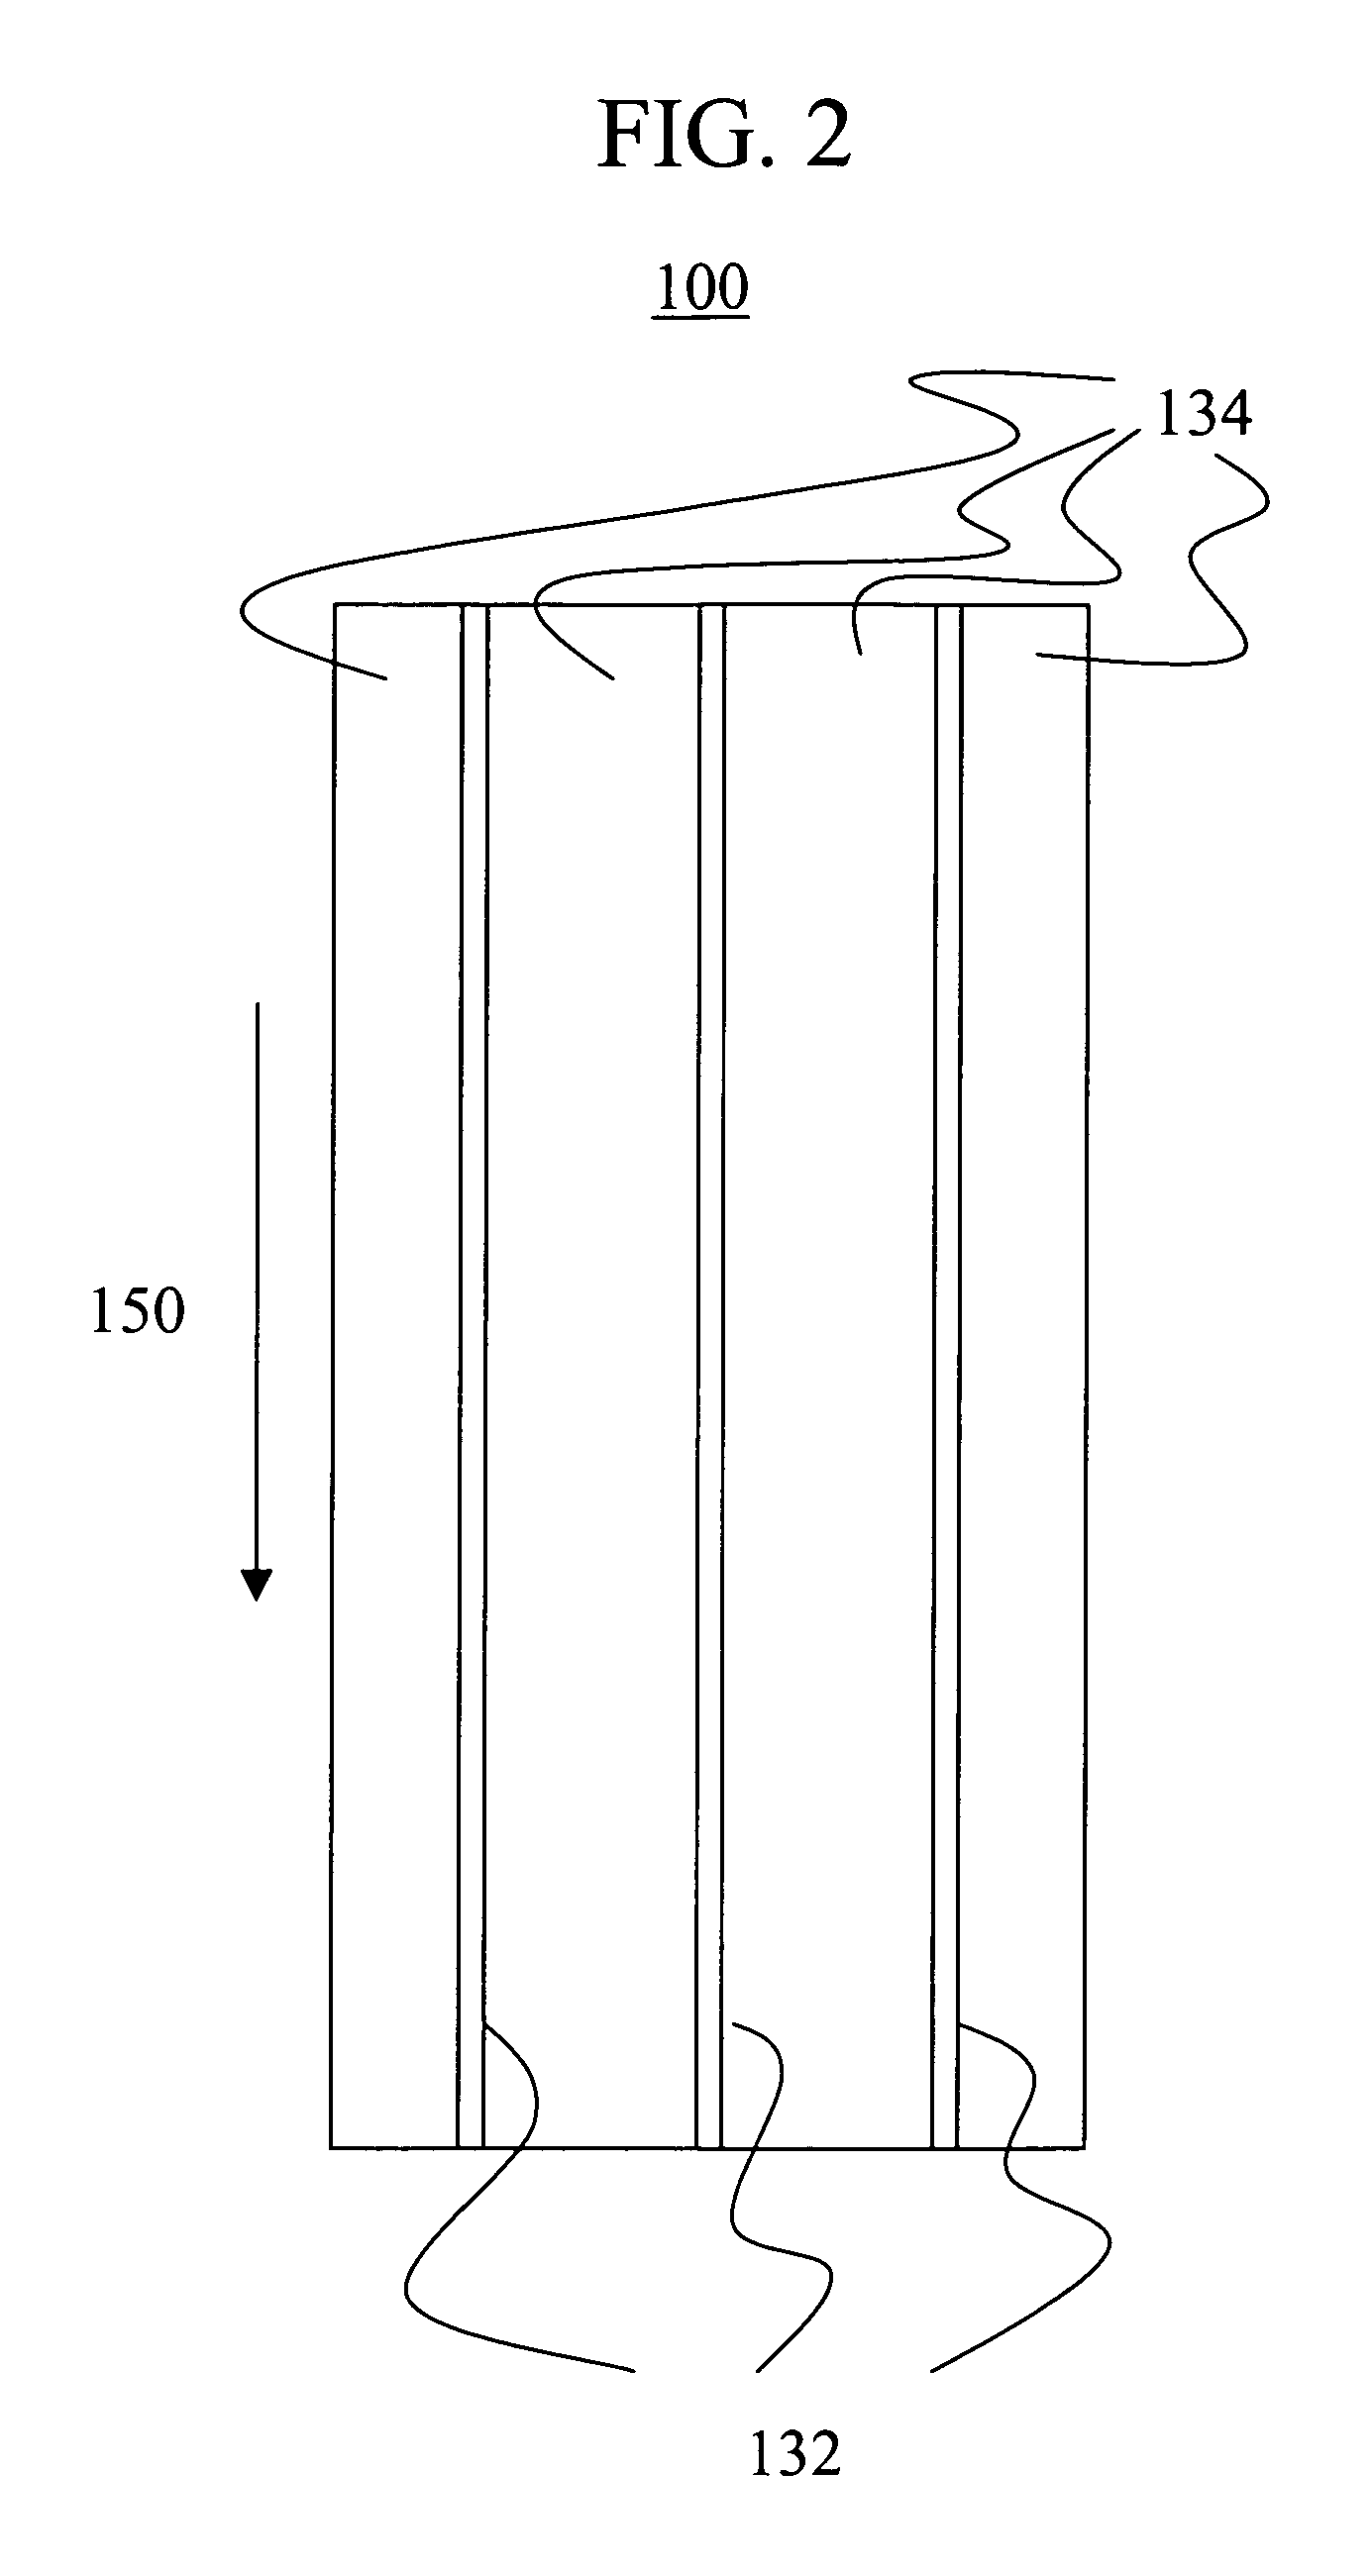 Segmented superconducting tape having reduced AC losses and method of making